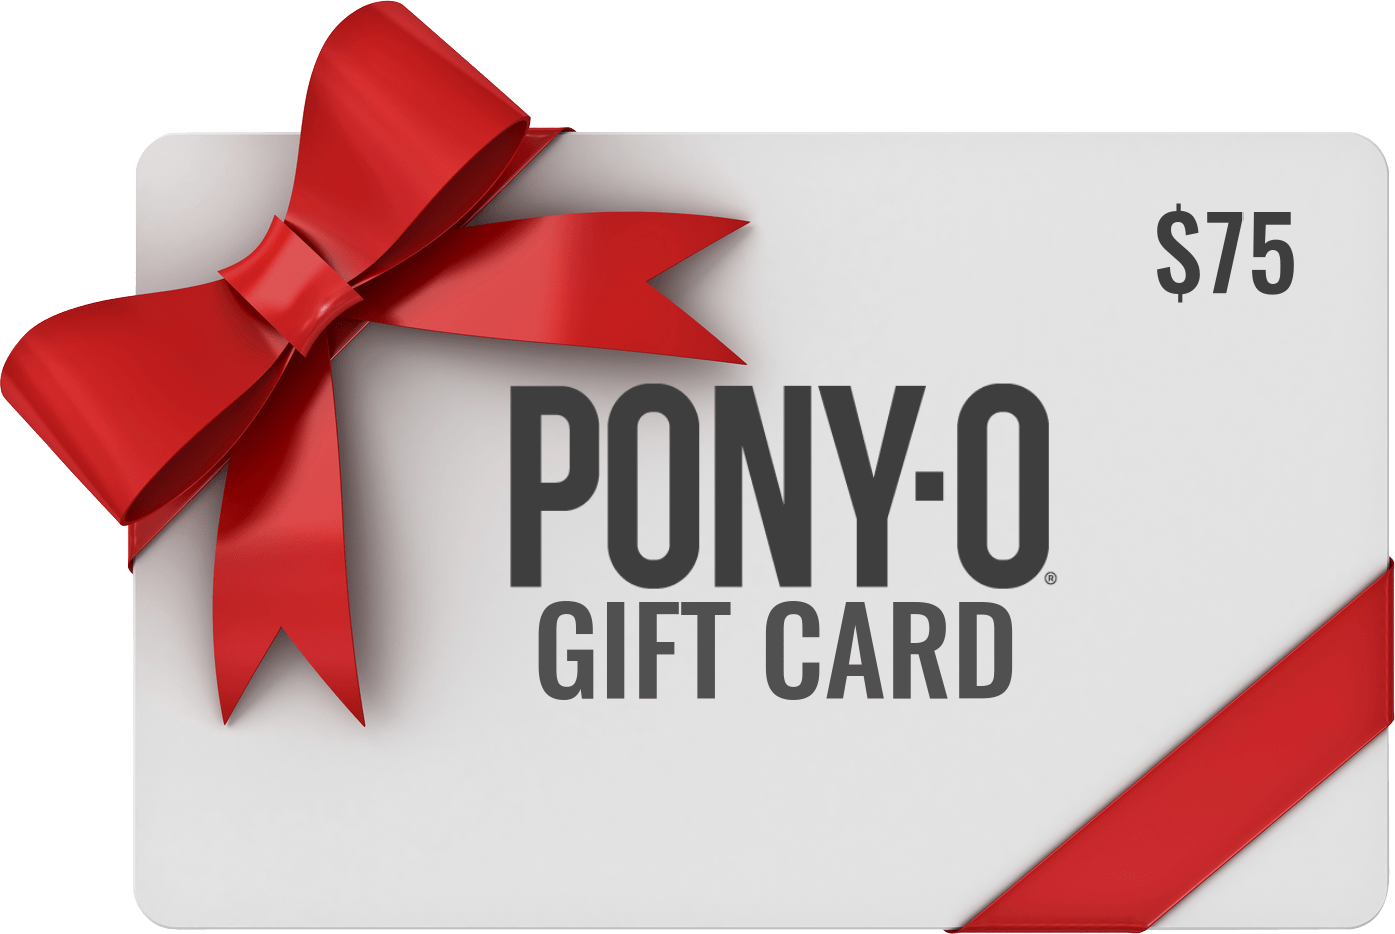 One seventy-five dollar PONY-O gift card. Not a physical card, but an electronically-transmitted item.